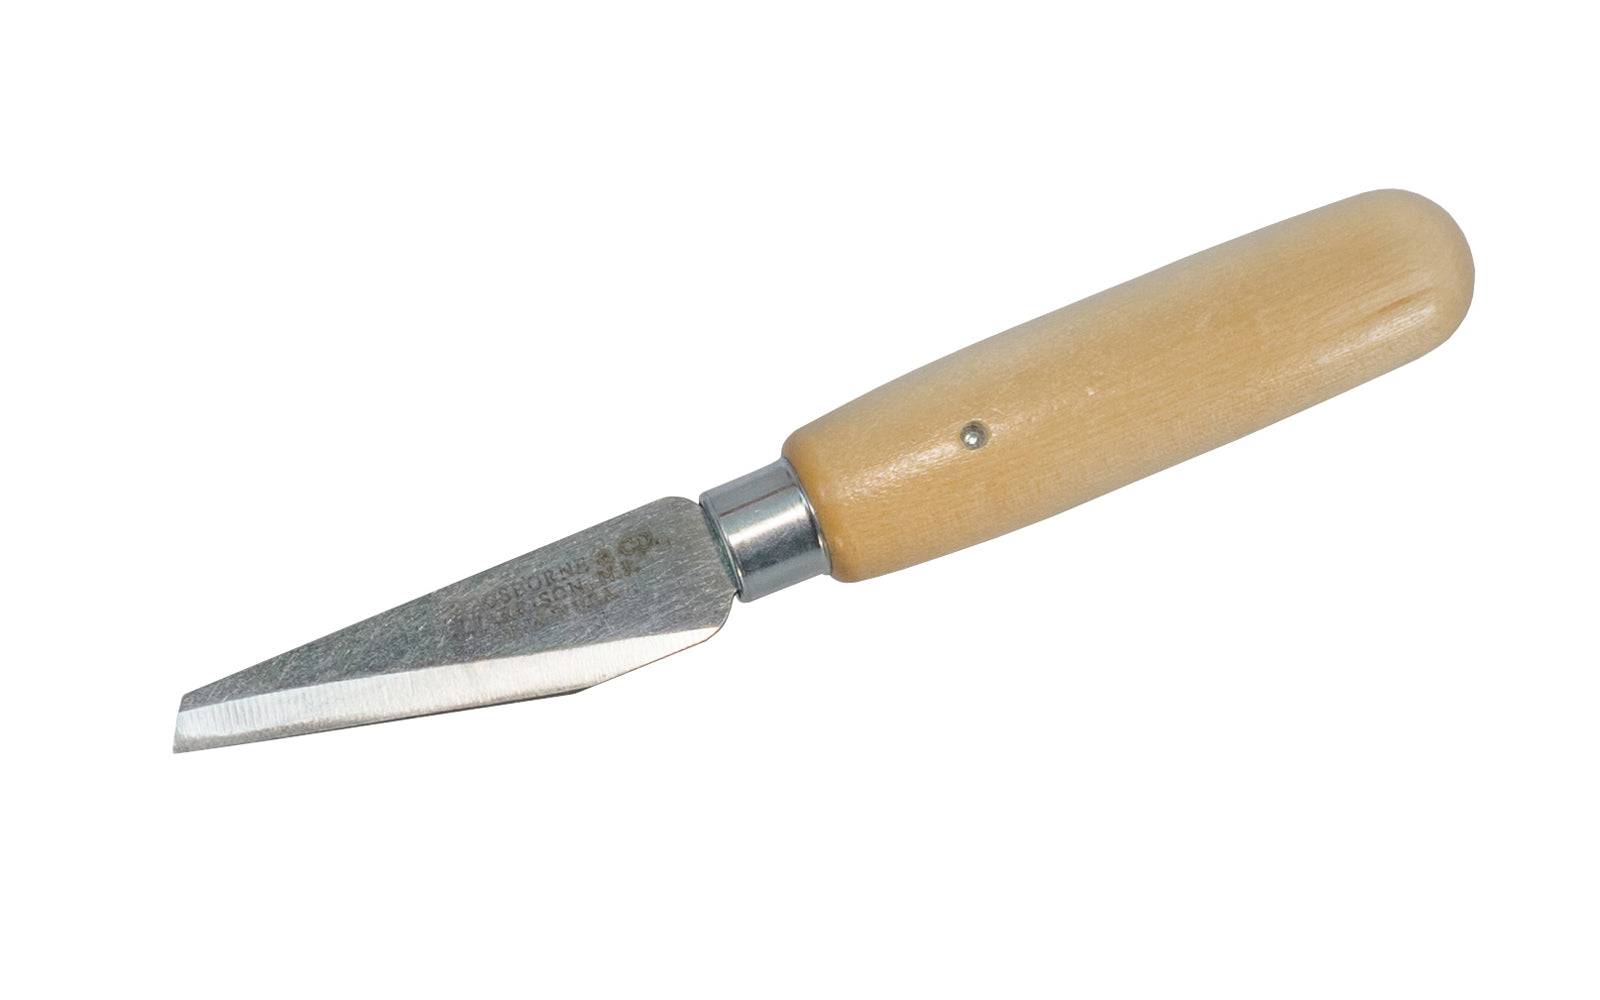 CS Osborne Bevel Point Knife - 3" Blade ~ No. 479 - High quality carbon steel blade - Osborne #479 Bevel Knife - Commonly used in skiving & edge trimming on leather & similar materials ~ Made in USA ~ 096685601120